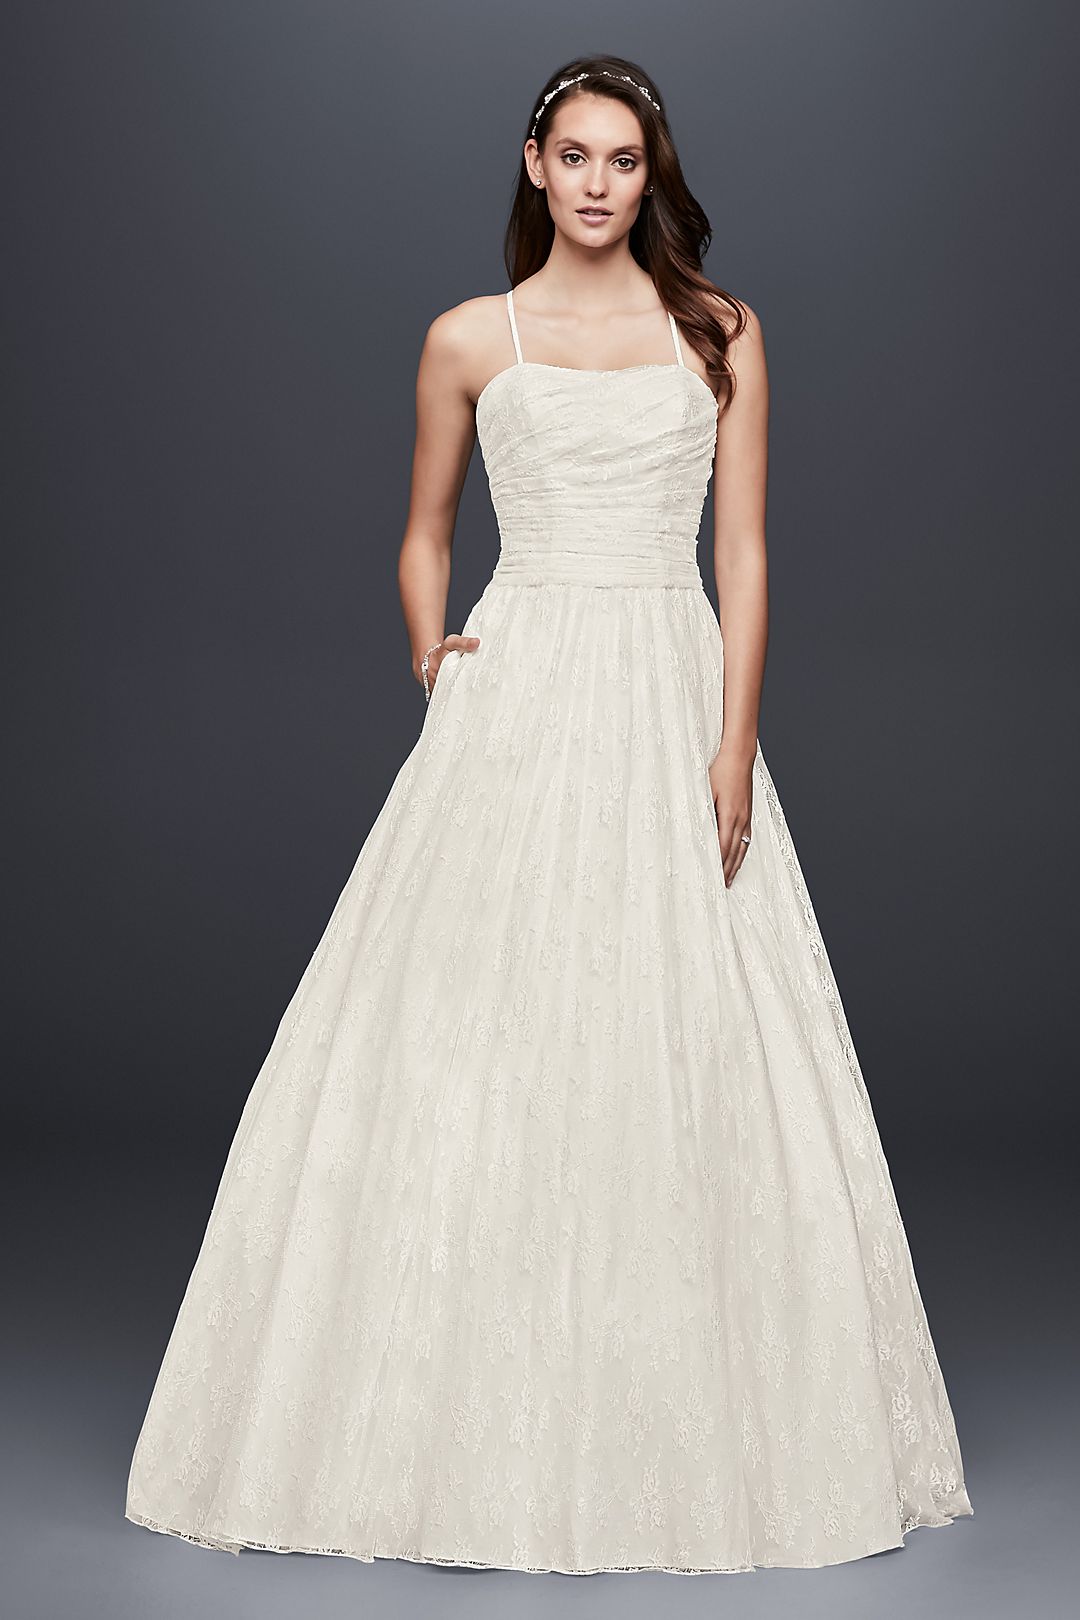 Allover Lace Ball Gown with Spaghetti Straps Image 1